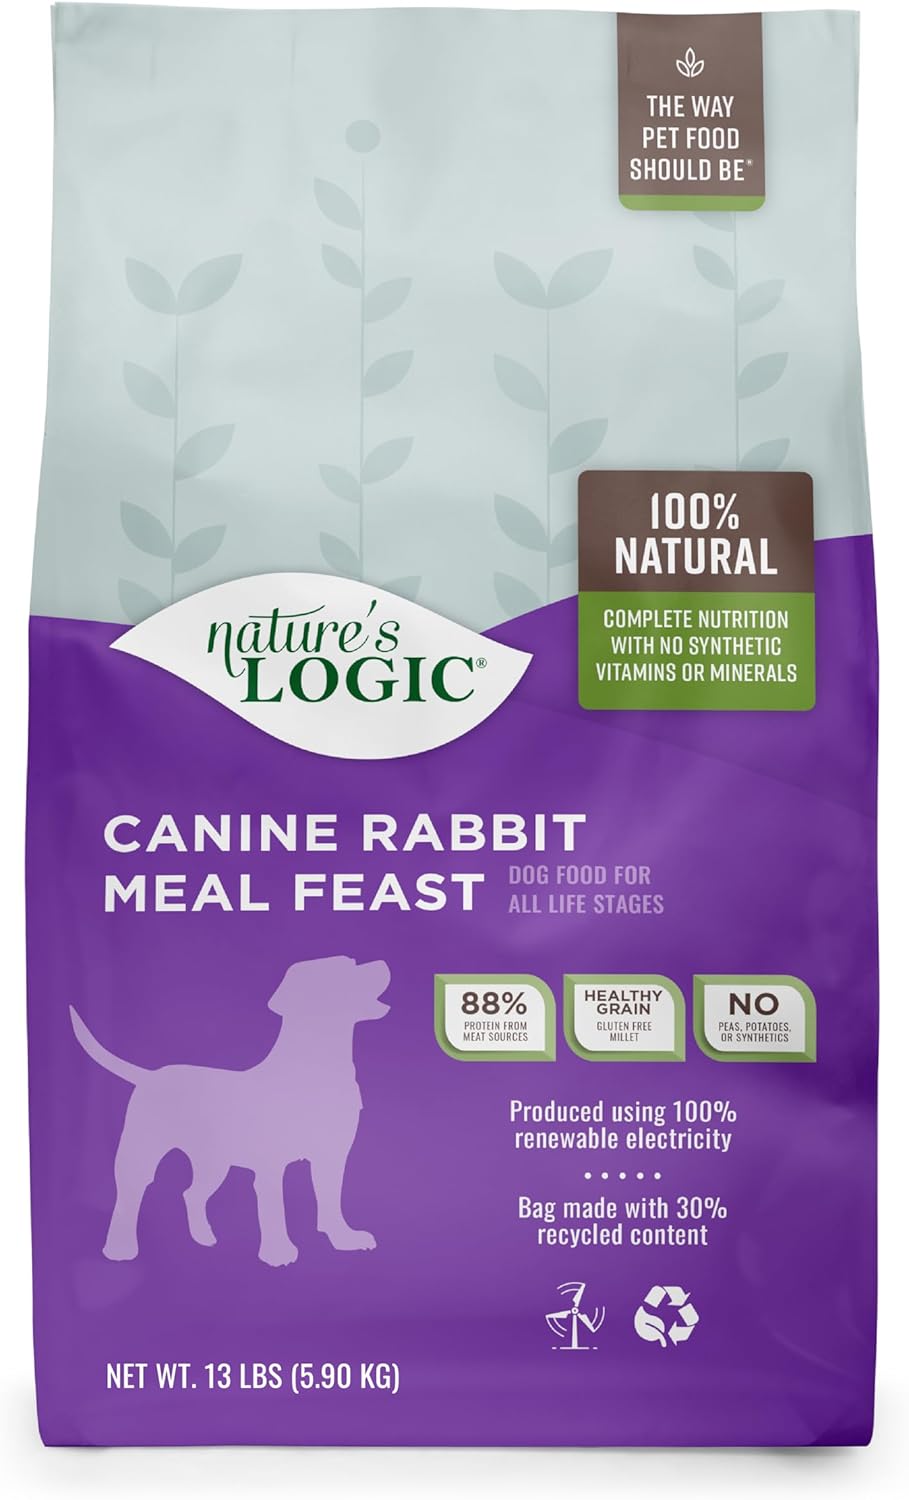 Nature’s Logic Canine Rabbit Meal Feast Dry Dog Food – Gallery Image 1